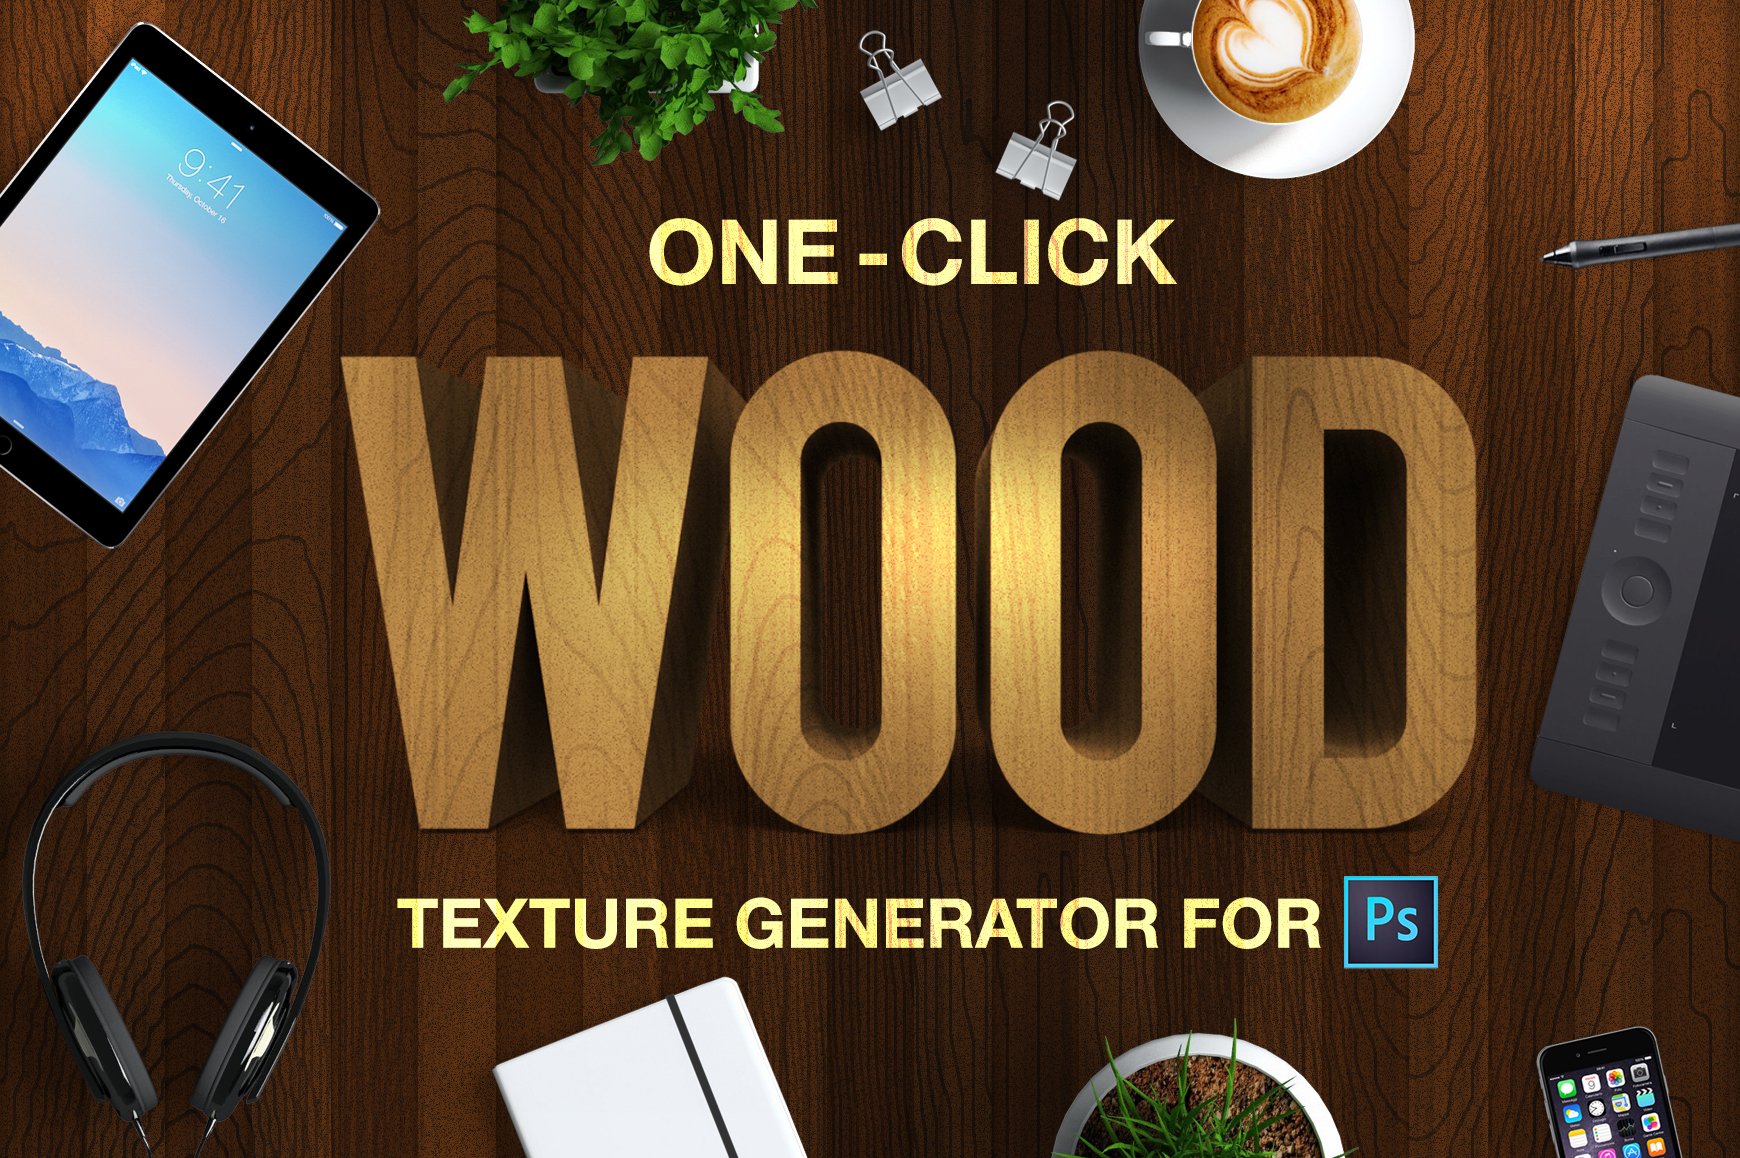 Wood Texture Generator - One Clickcover image.